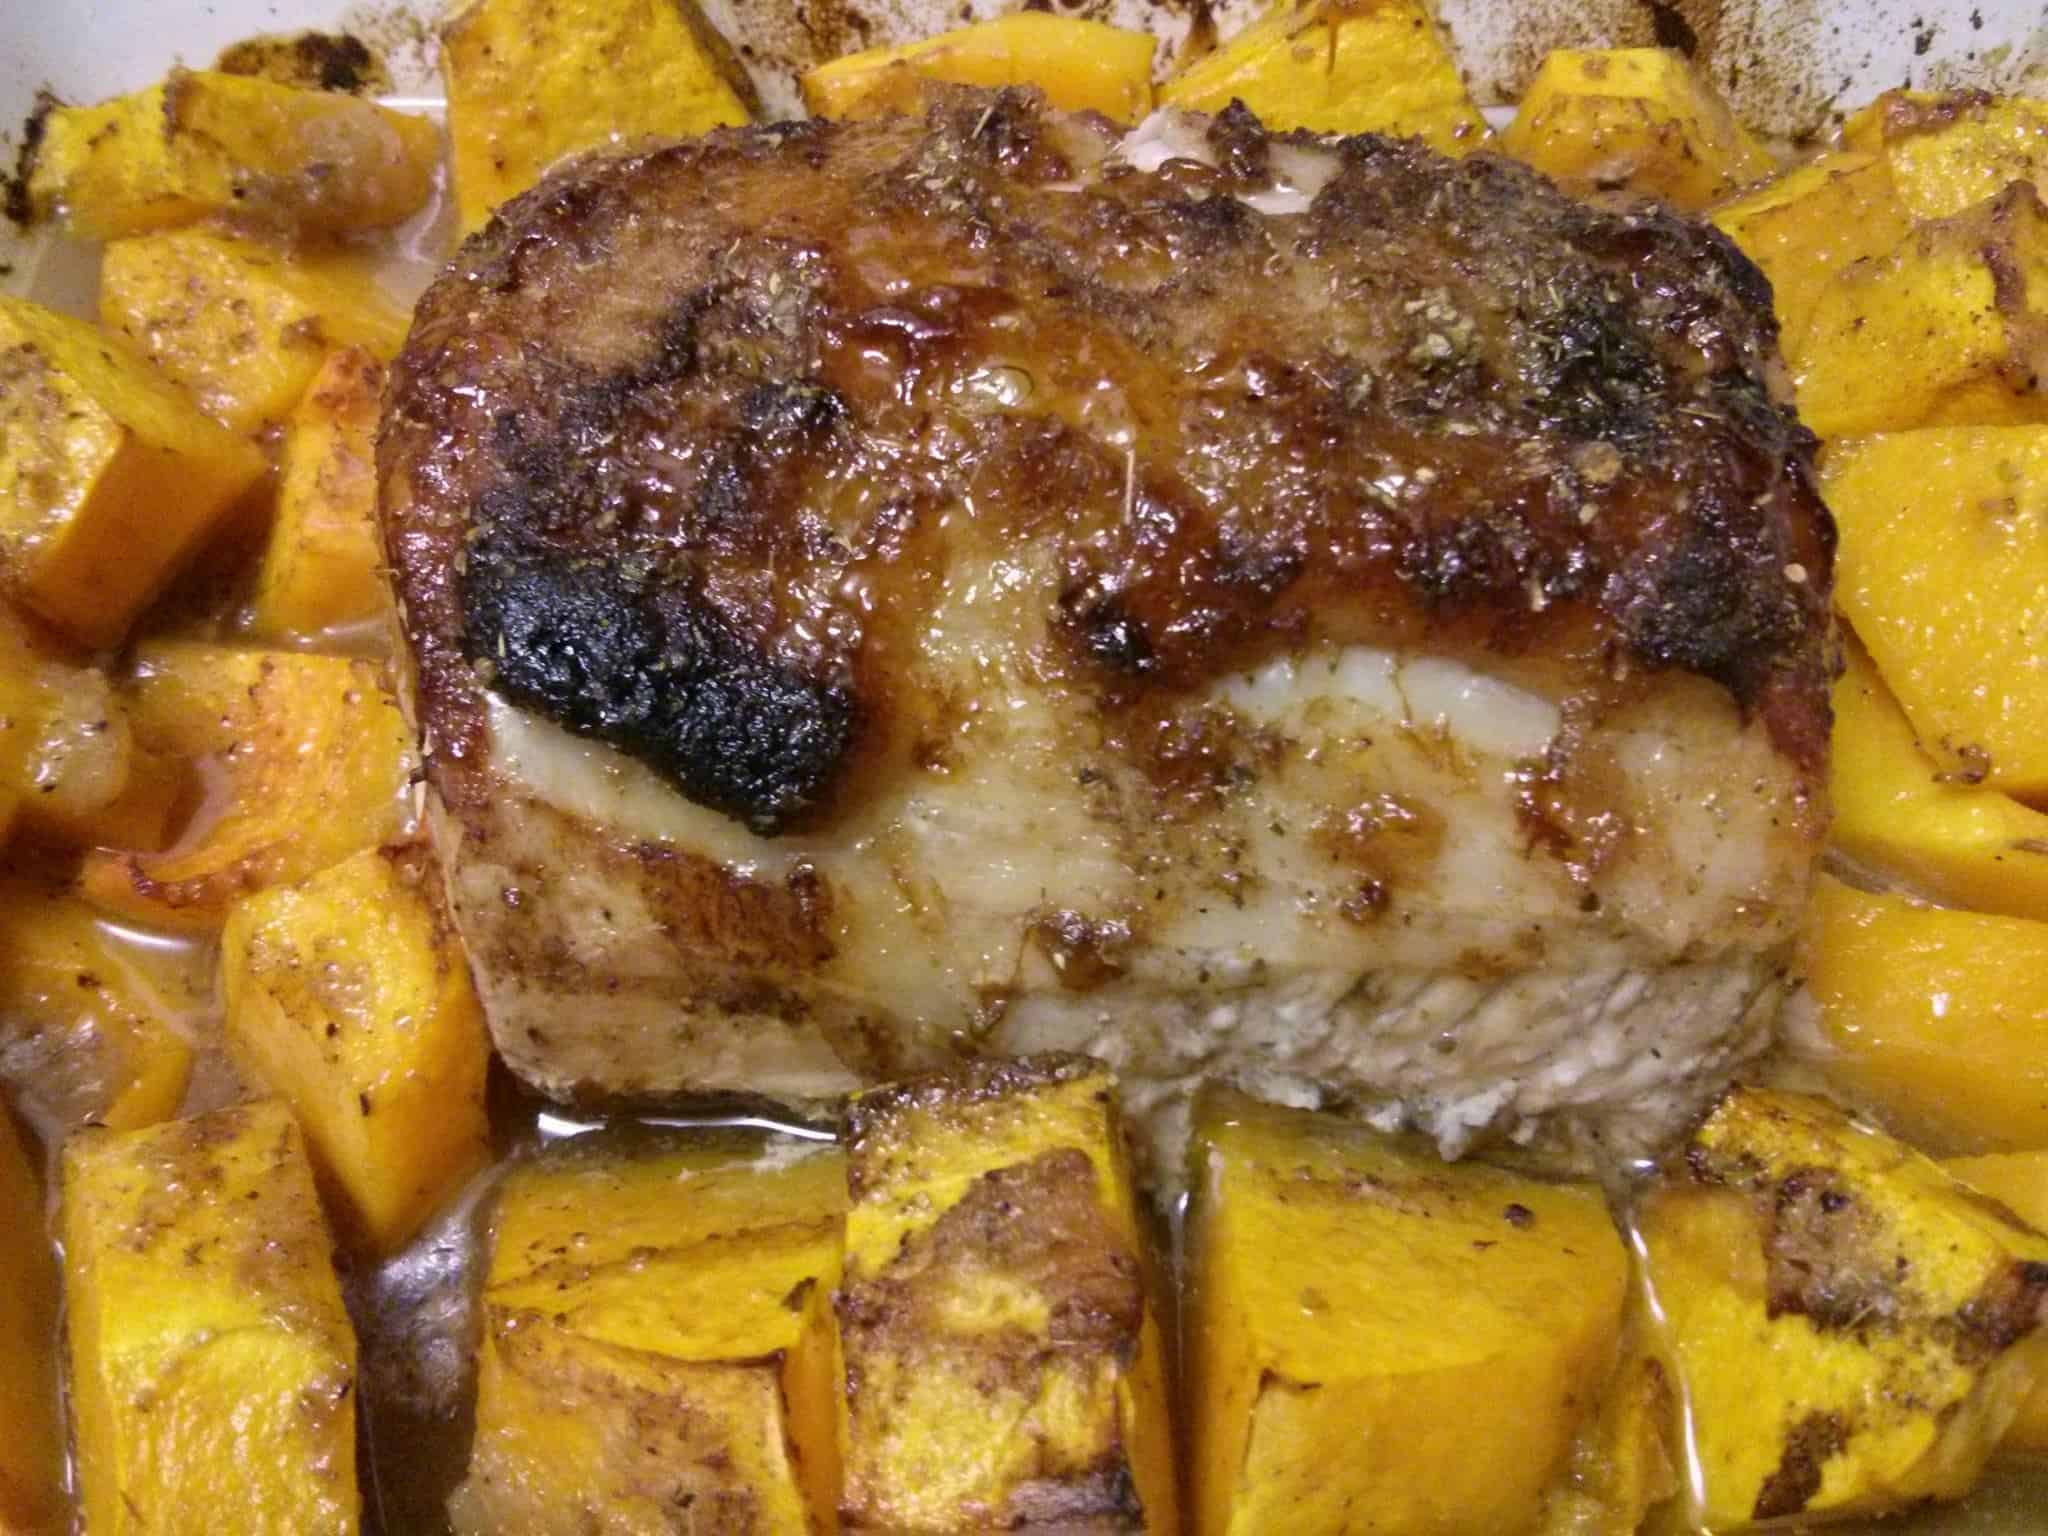 Pork Roast with butternut squash baked in the oven